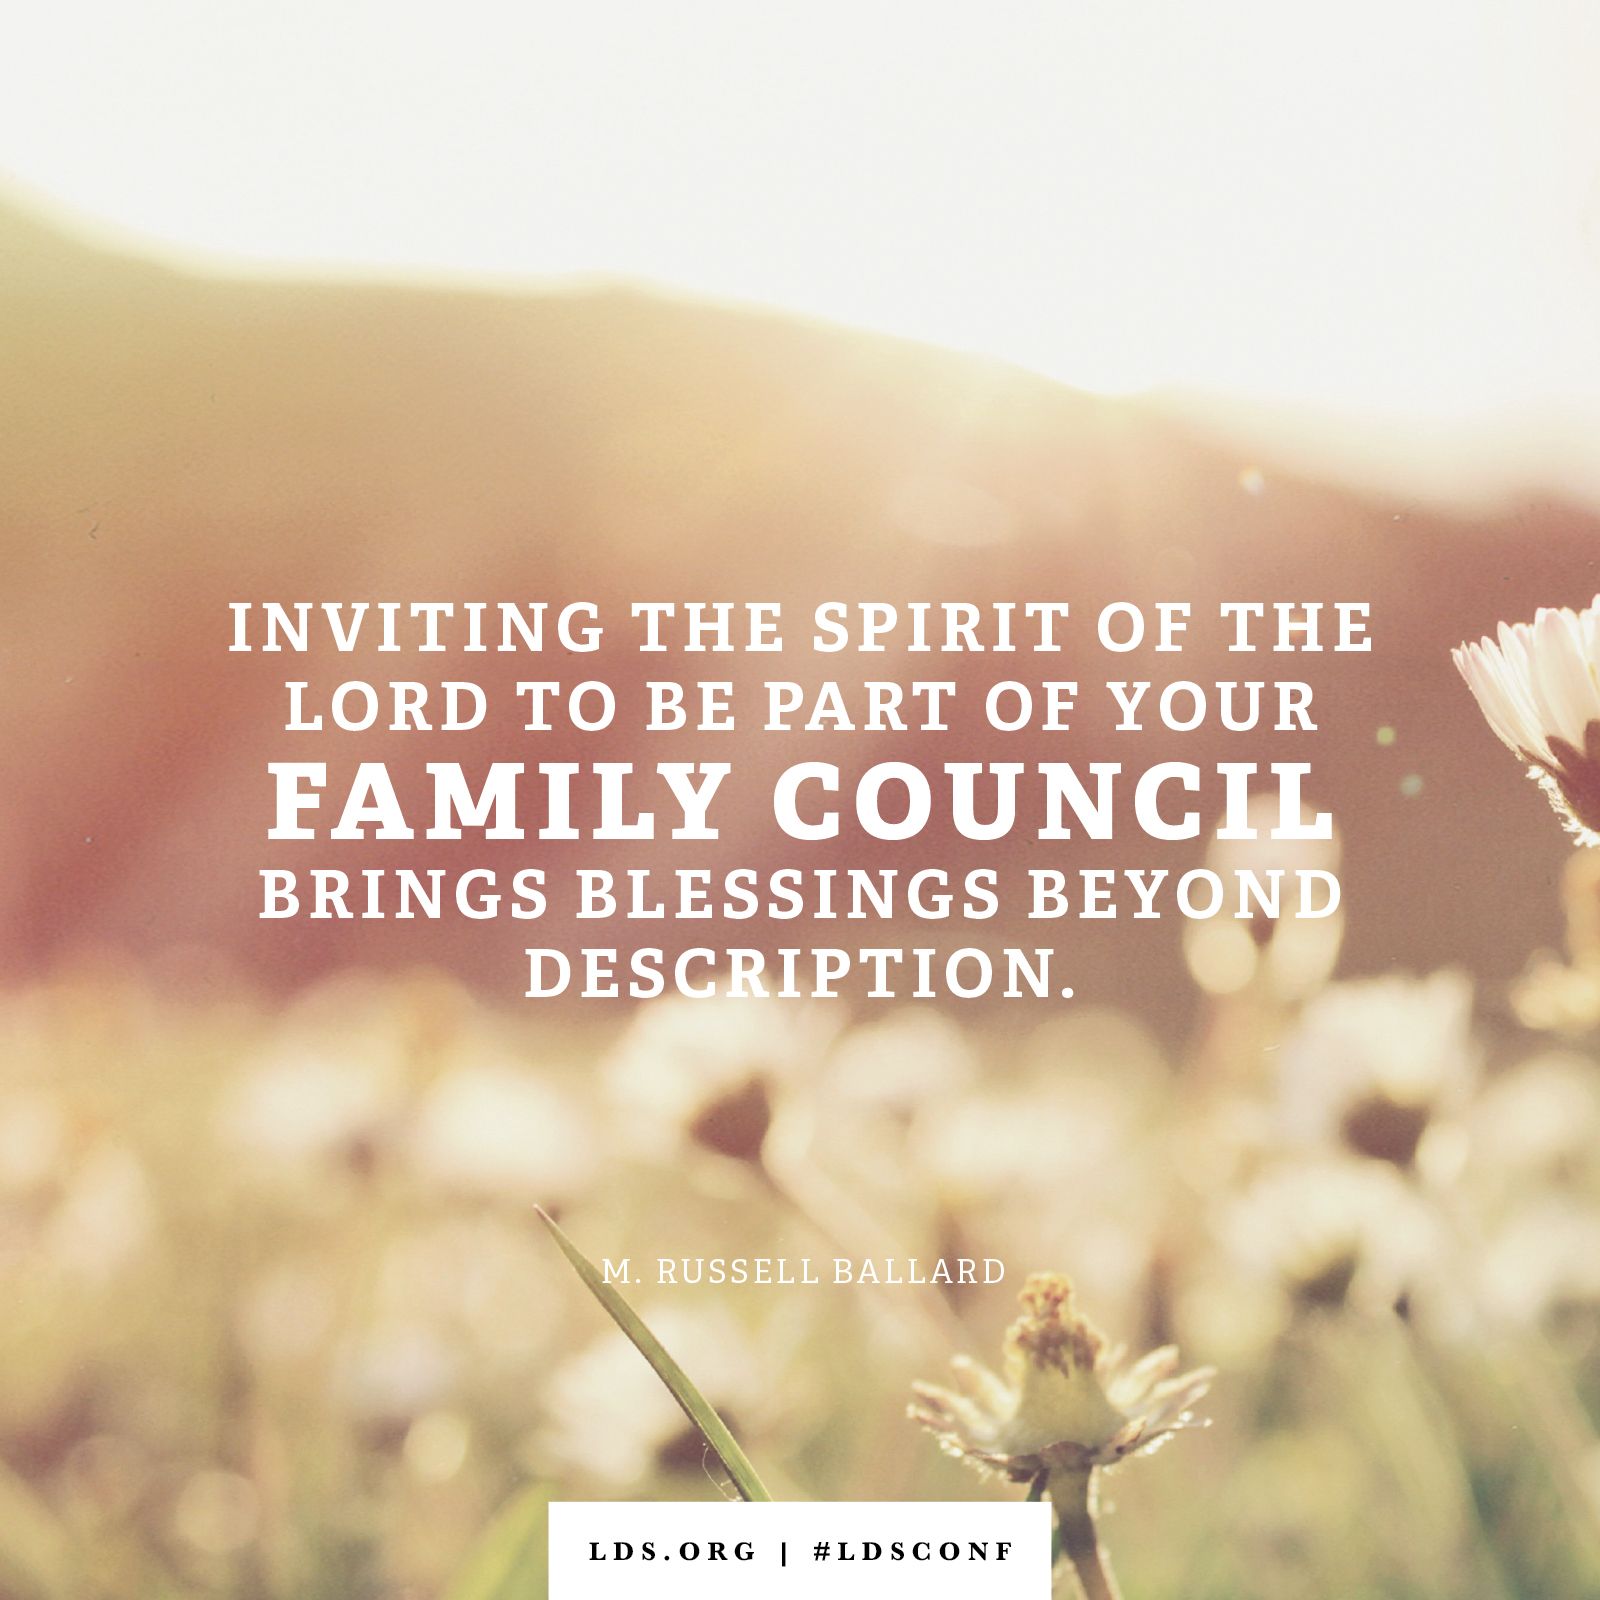 “Inviting the Spirit of the Lord to be part of your family council brings blessings beyond description.” —Elder M. Russell Ballard, “Family Councils”